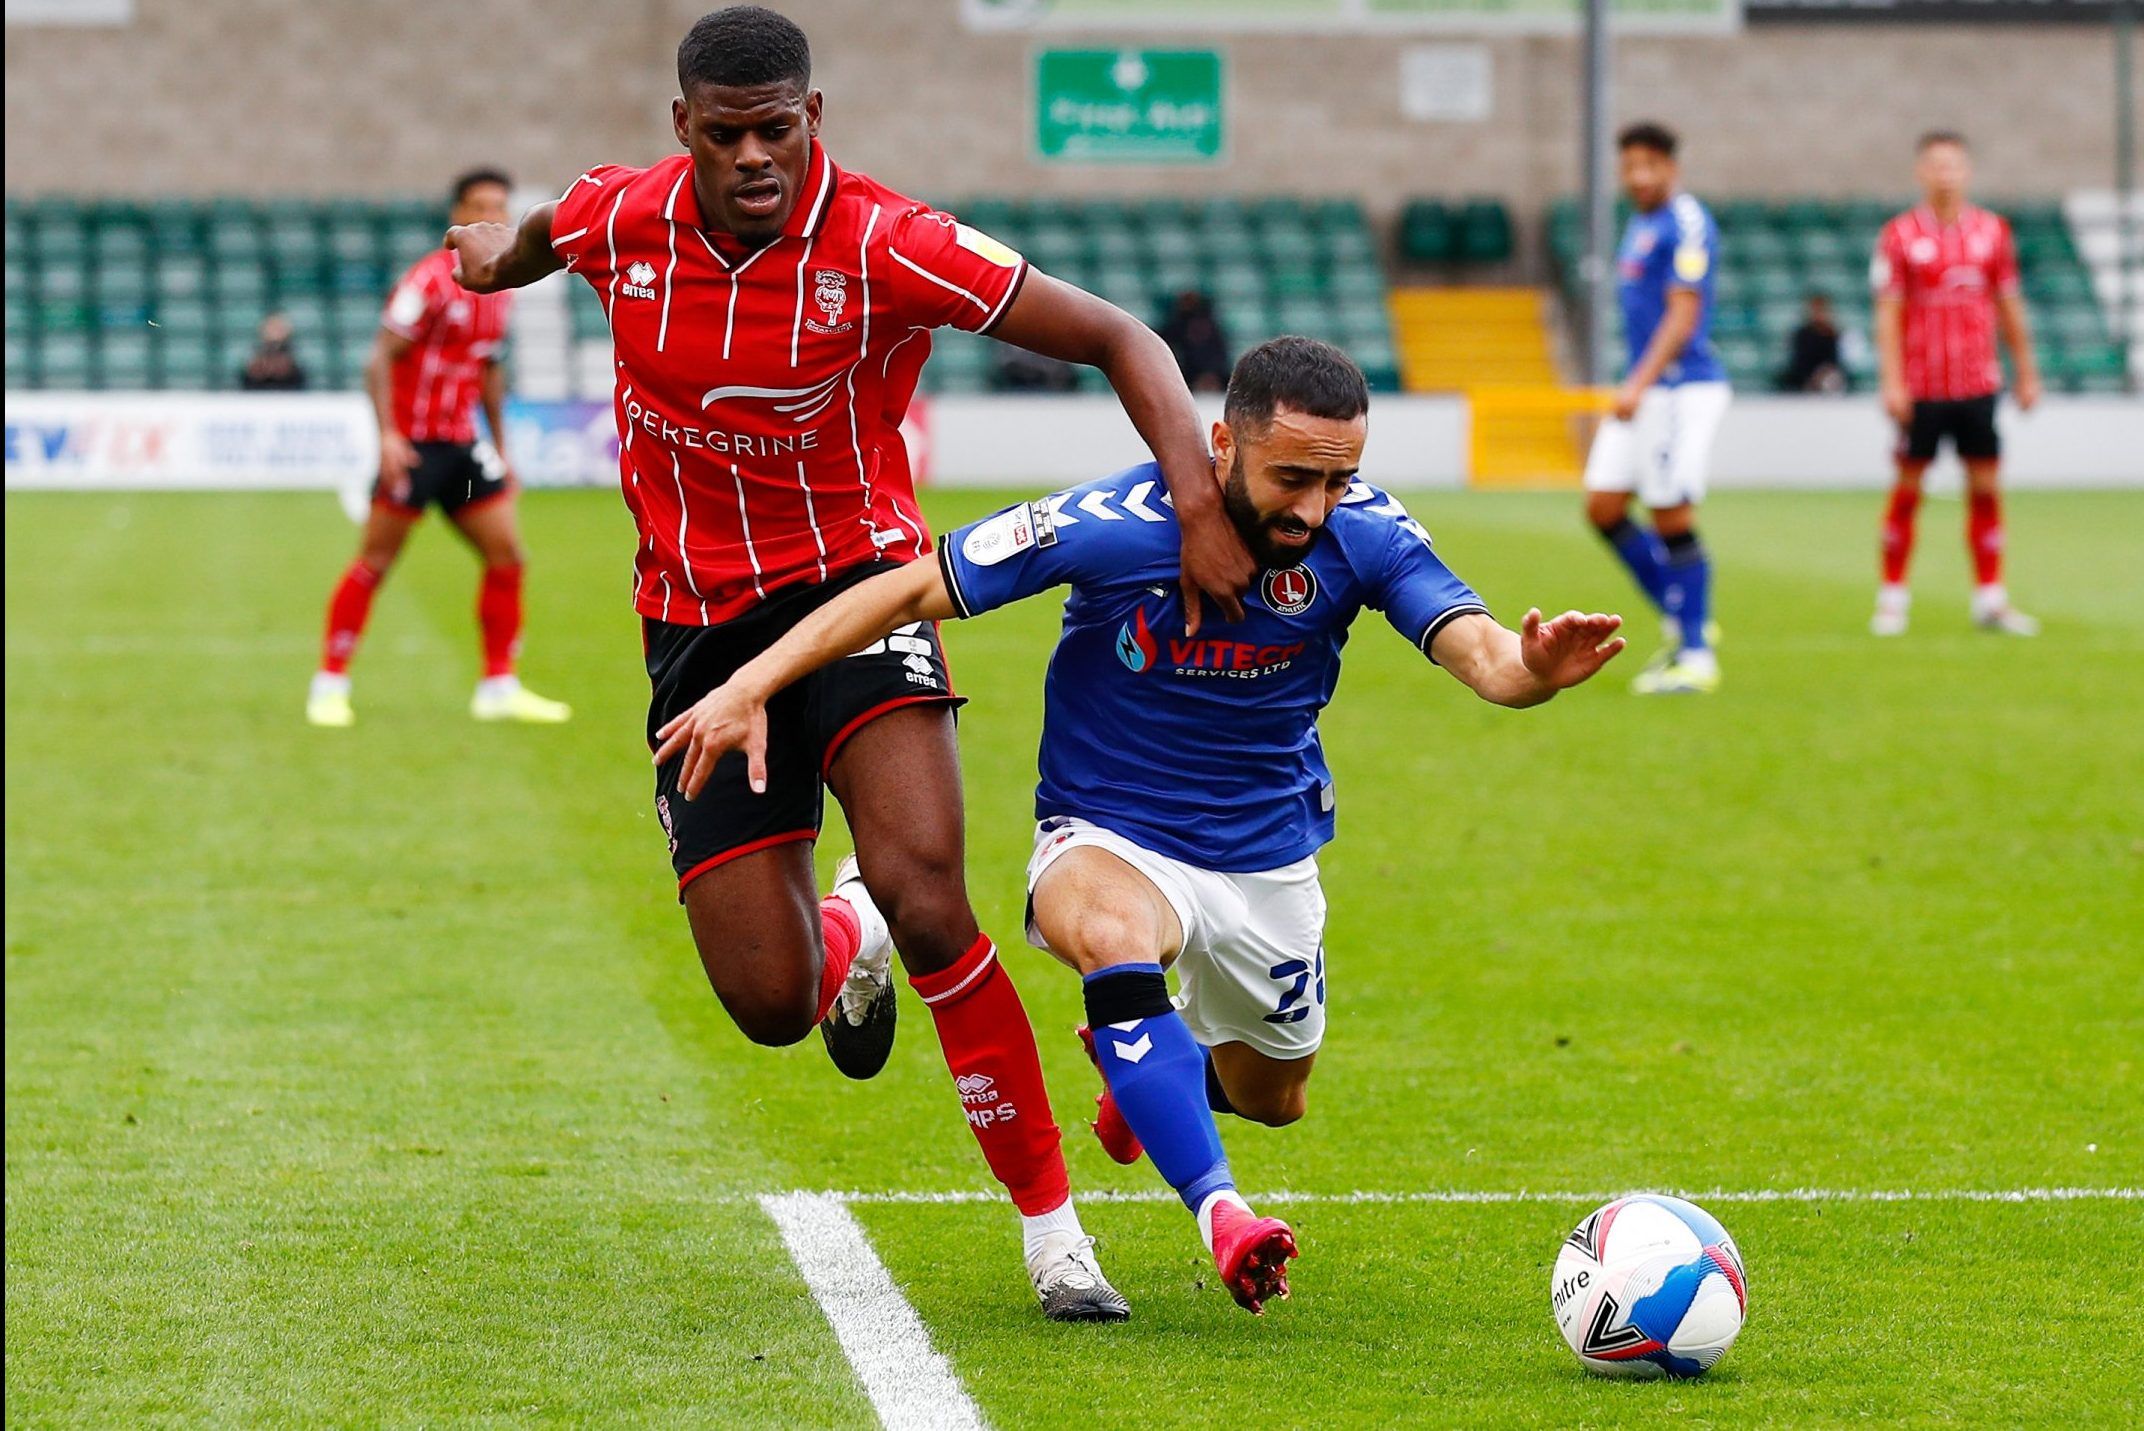 spurs loanee timothy tj eyoma in action for lincoln city vs charlton league one